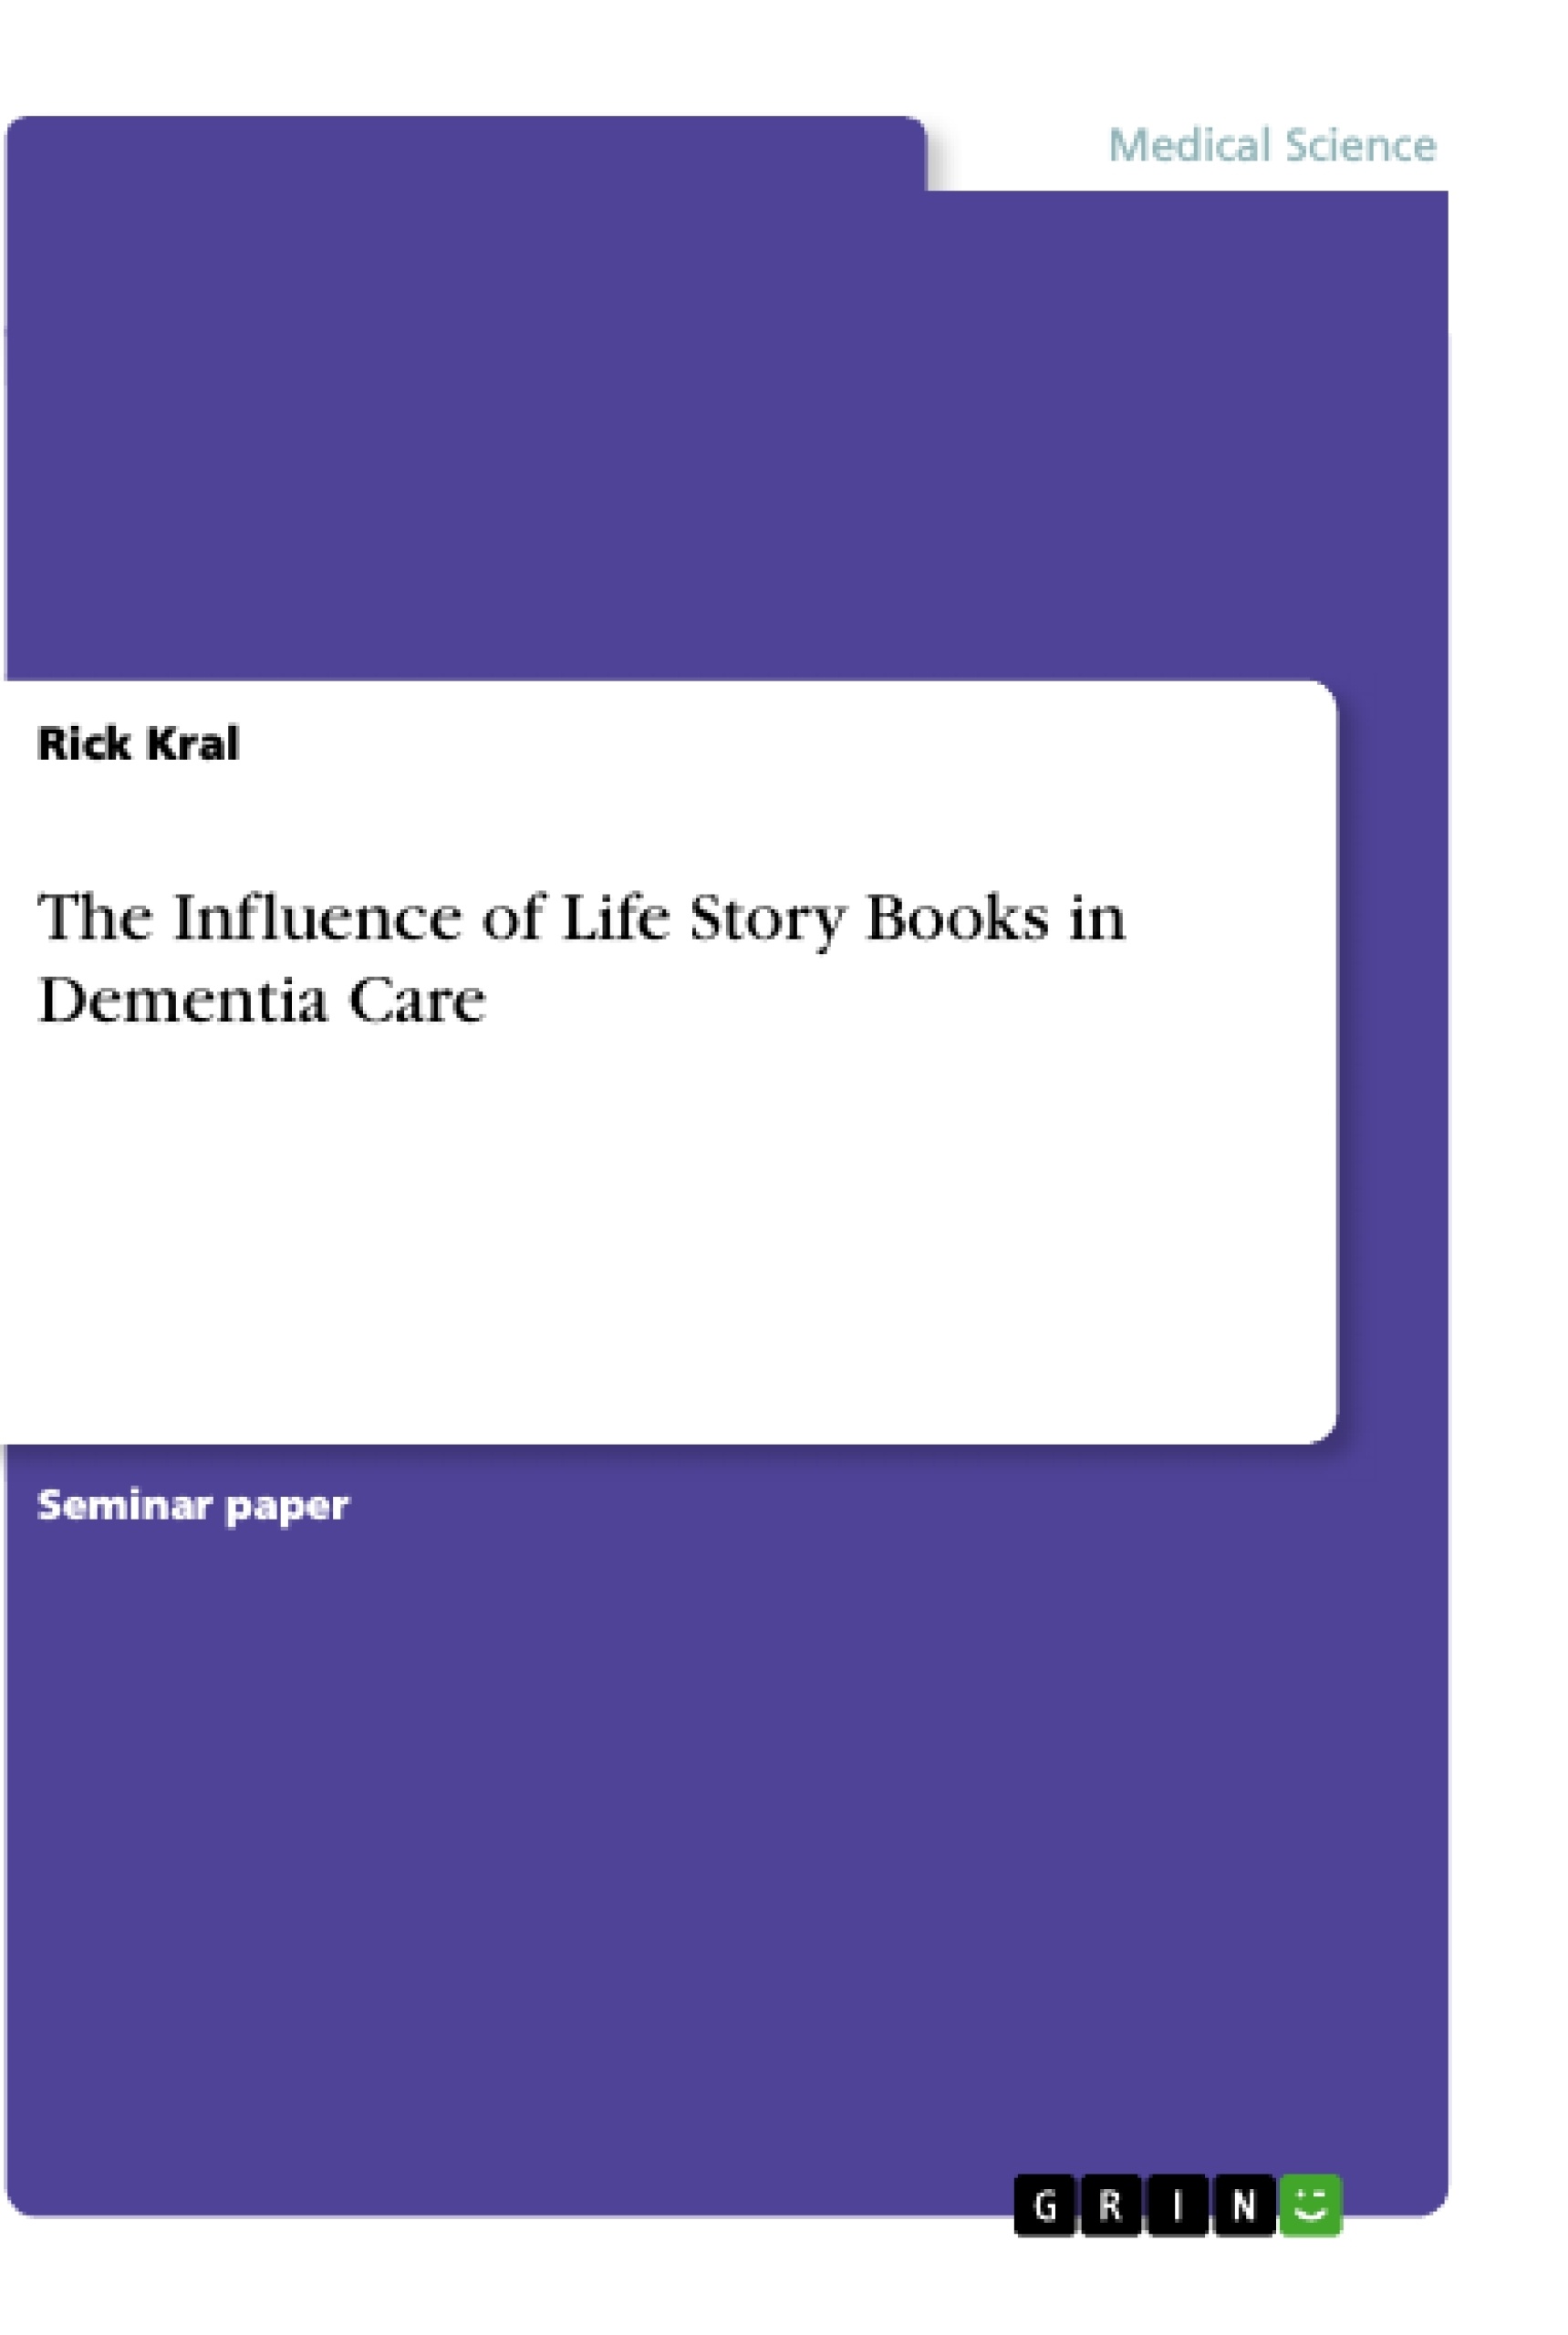 Titre: The Influence of Life Story Books in Dementia Care